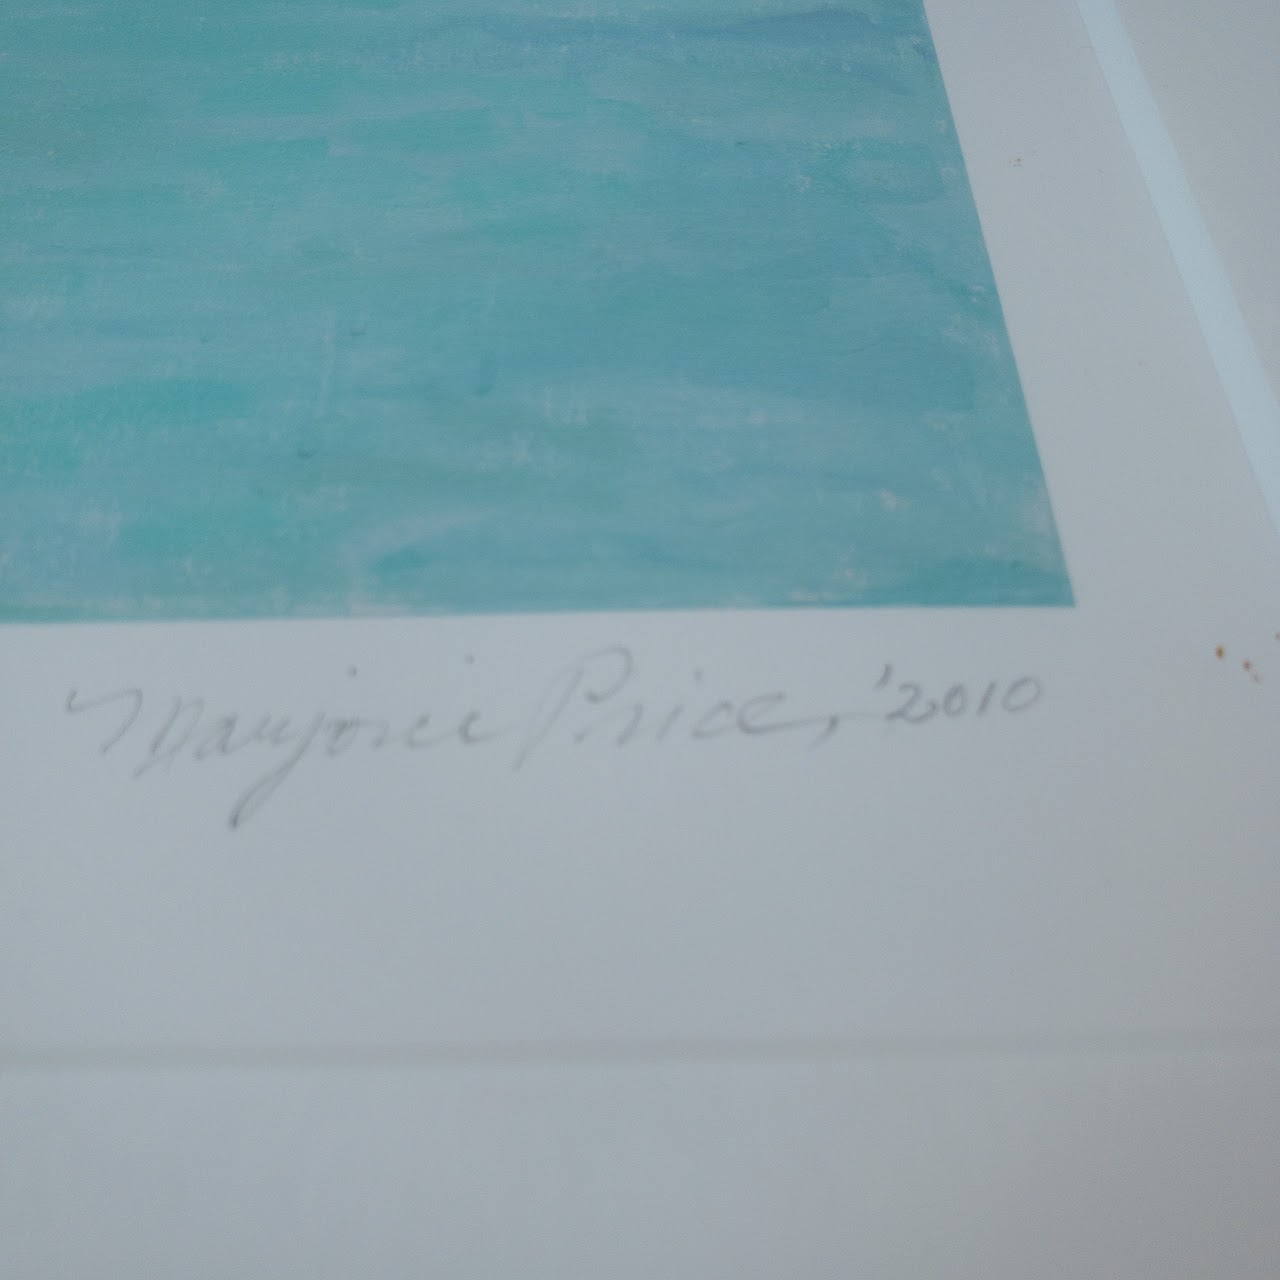 Marjorie Price Signed 'The First Bathers' Artist's Proof Print